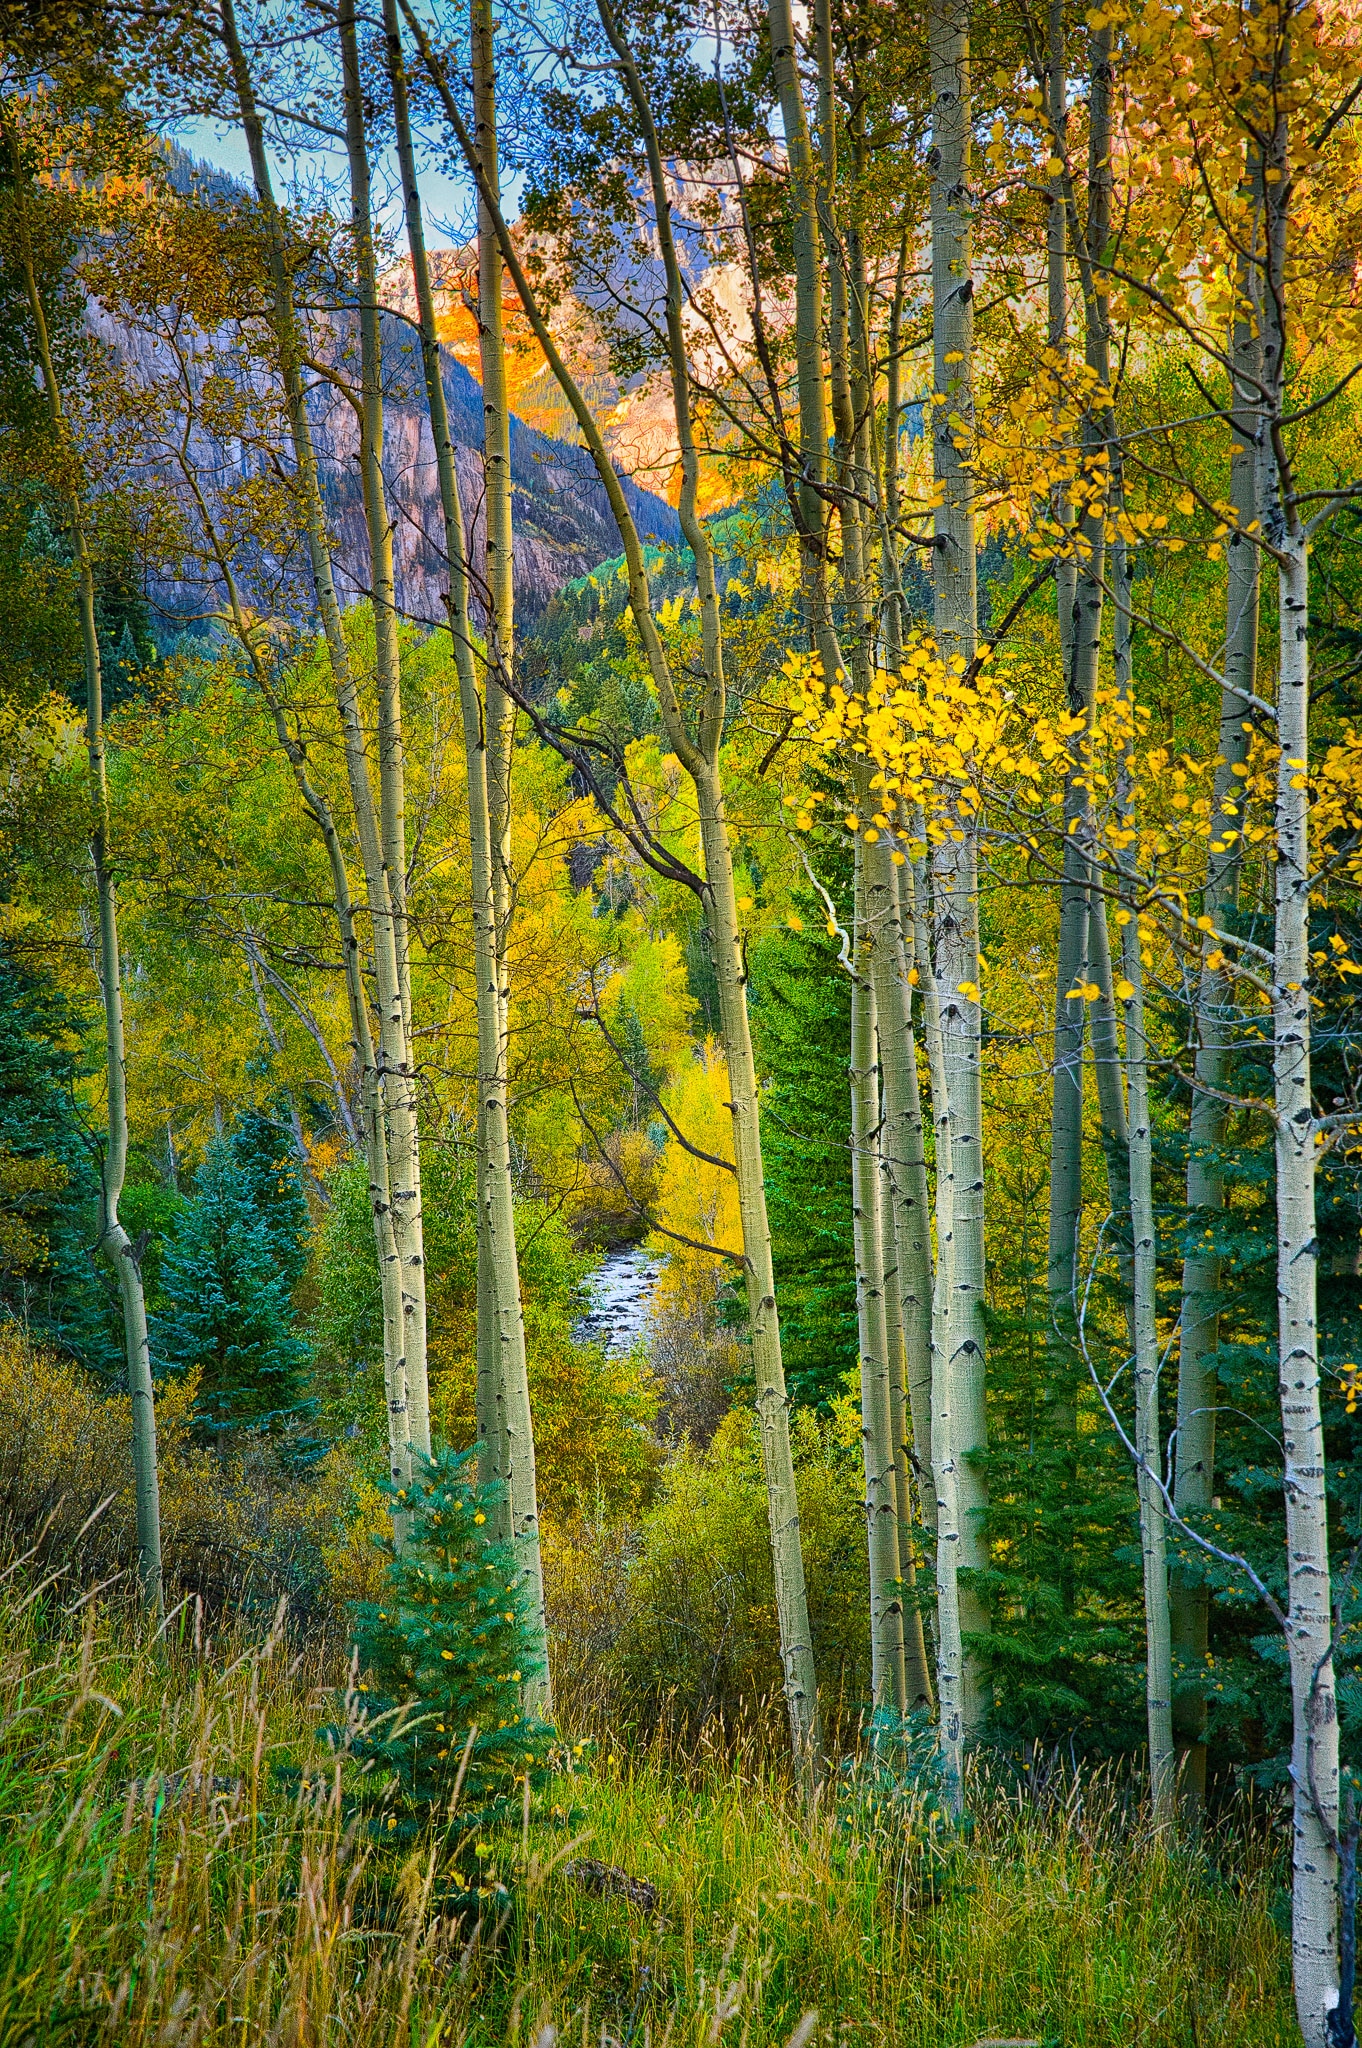 Camp Bird Road takes you to the old Camp Bird mining complex. This route is more famous for its ramshackle mining buildings and summer wild flowers. In the fall, though, colorful aspens, deep green confifers, and a the rushing water of Canyon Creek present photographers with varied and lovely views less than 10 miles from Ouray.